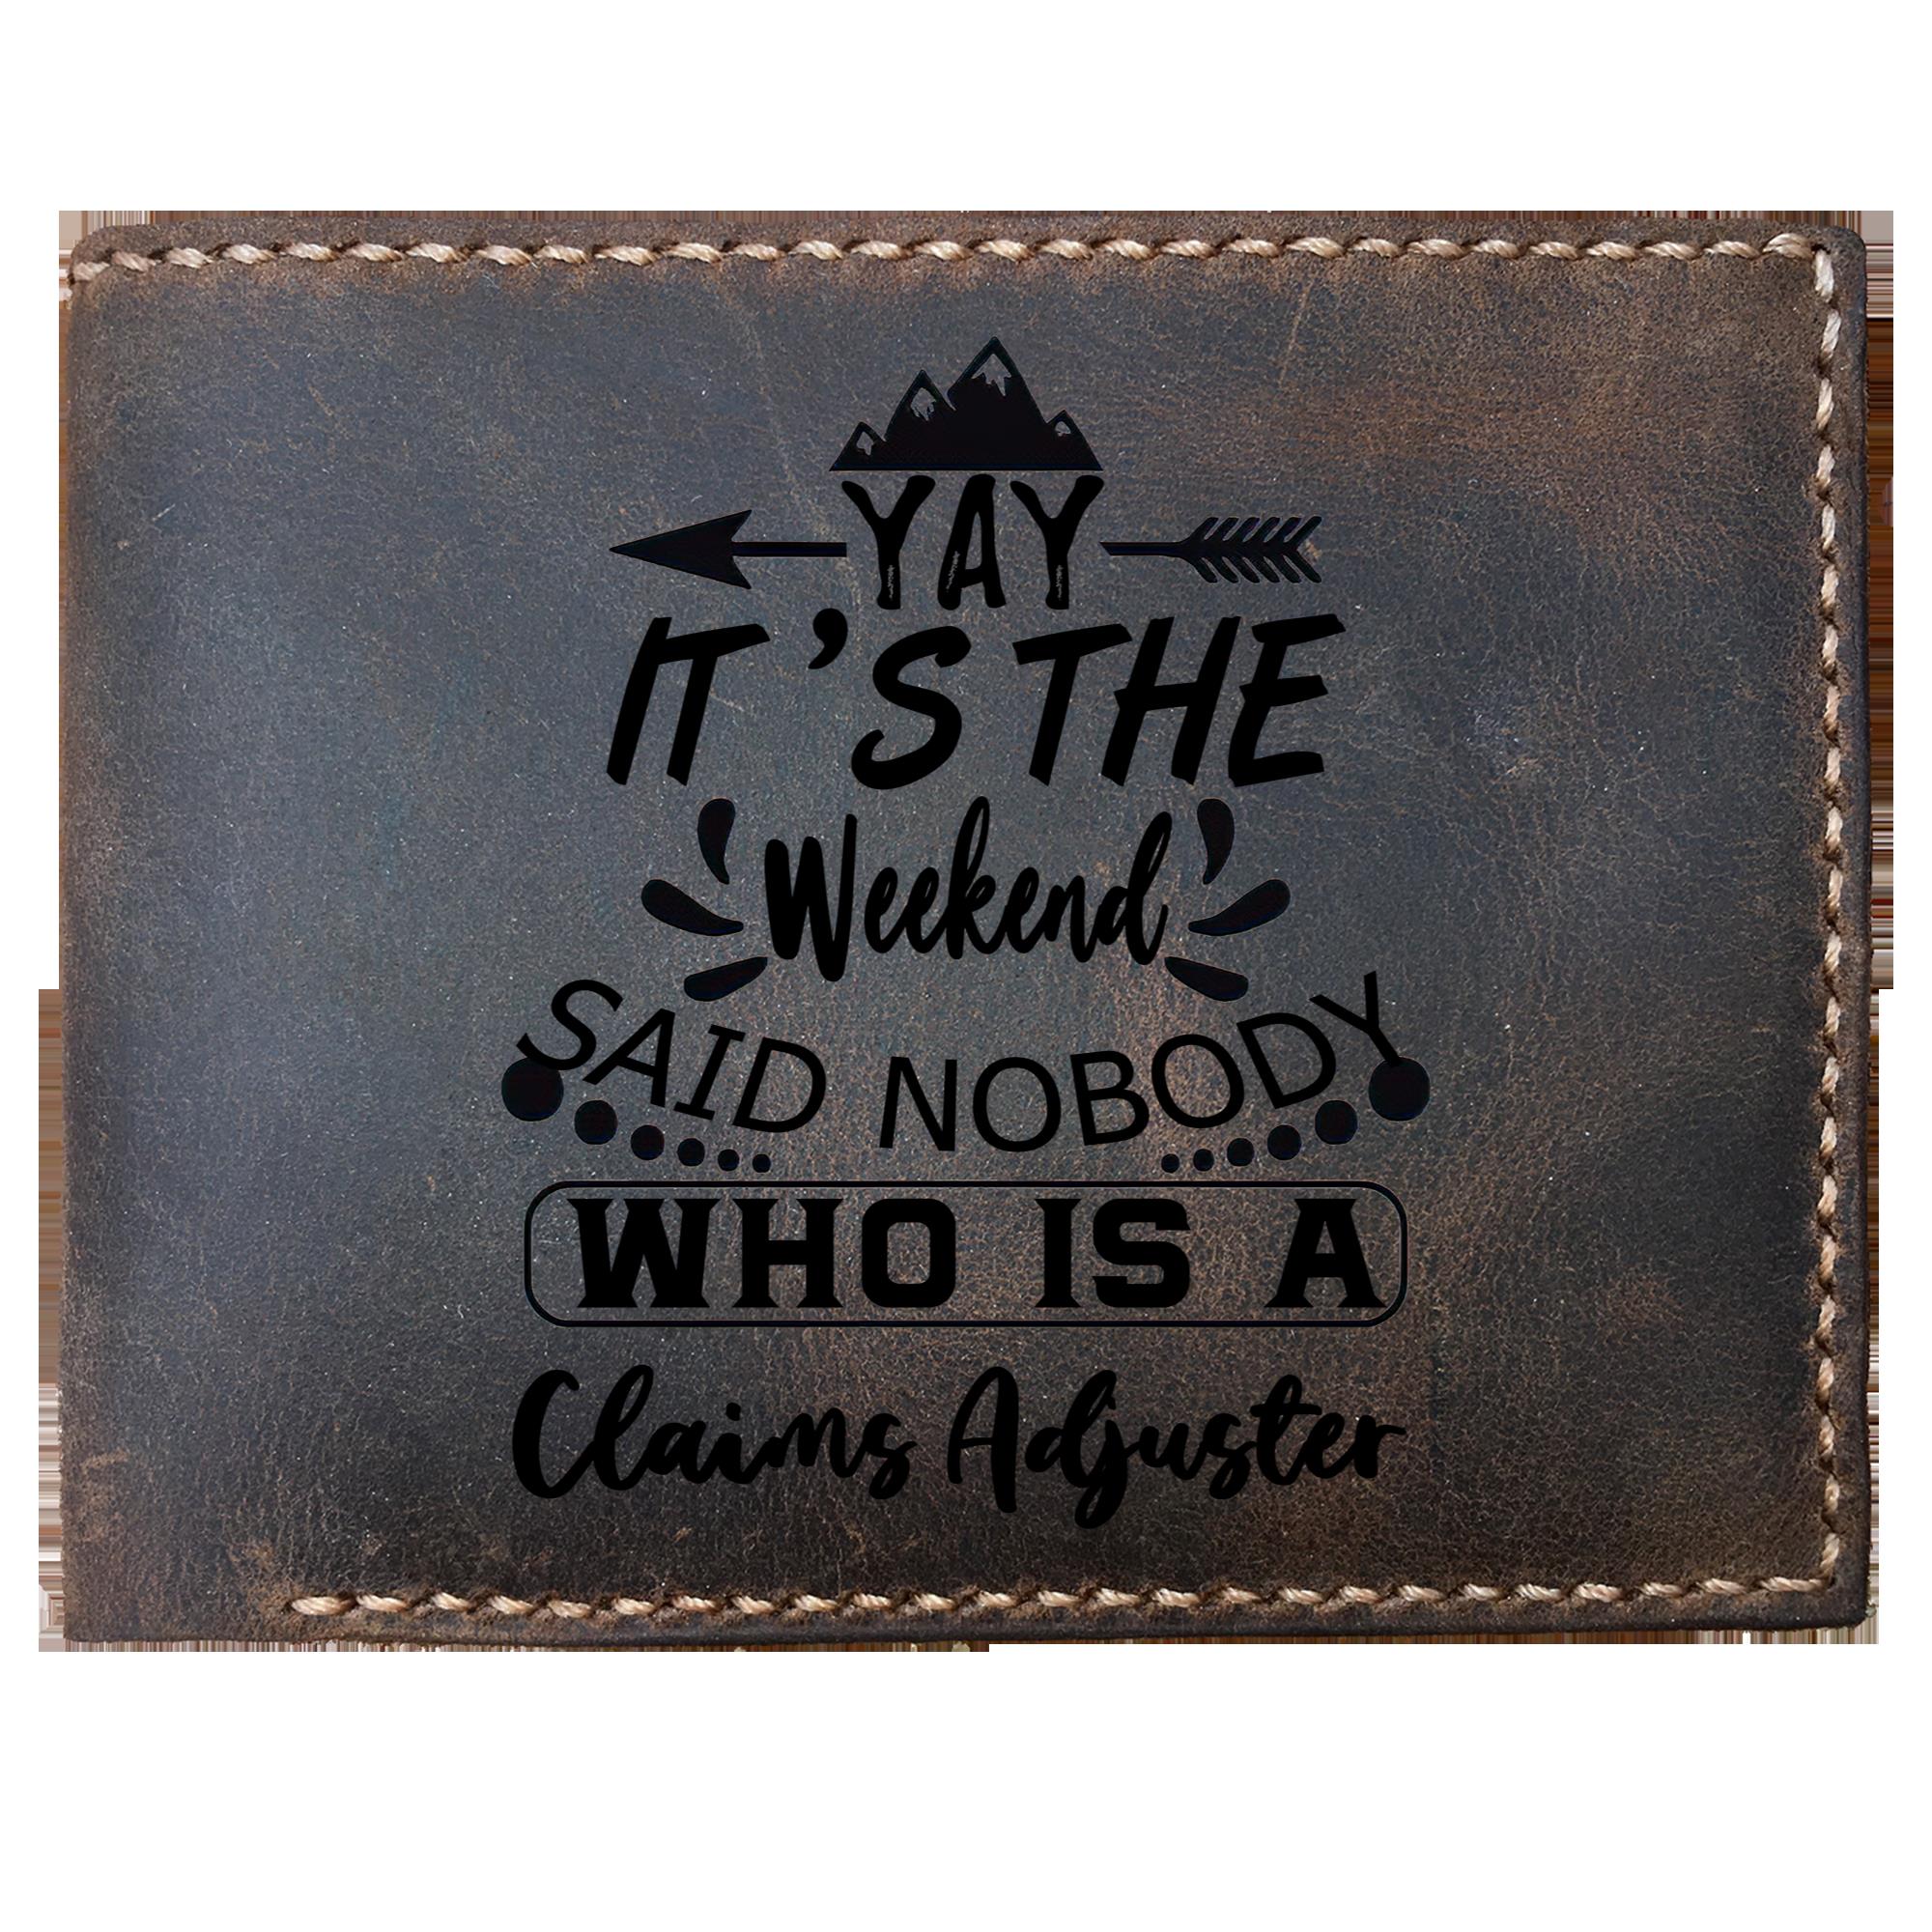 Skitongifts Funny Custom Laser Engraved Bifold Leather Wallet For Men, It's The Weekend Said Nobody Who Is A Claims Adjuster, Father's Day Gifts